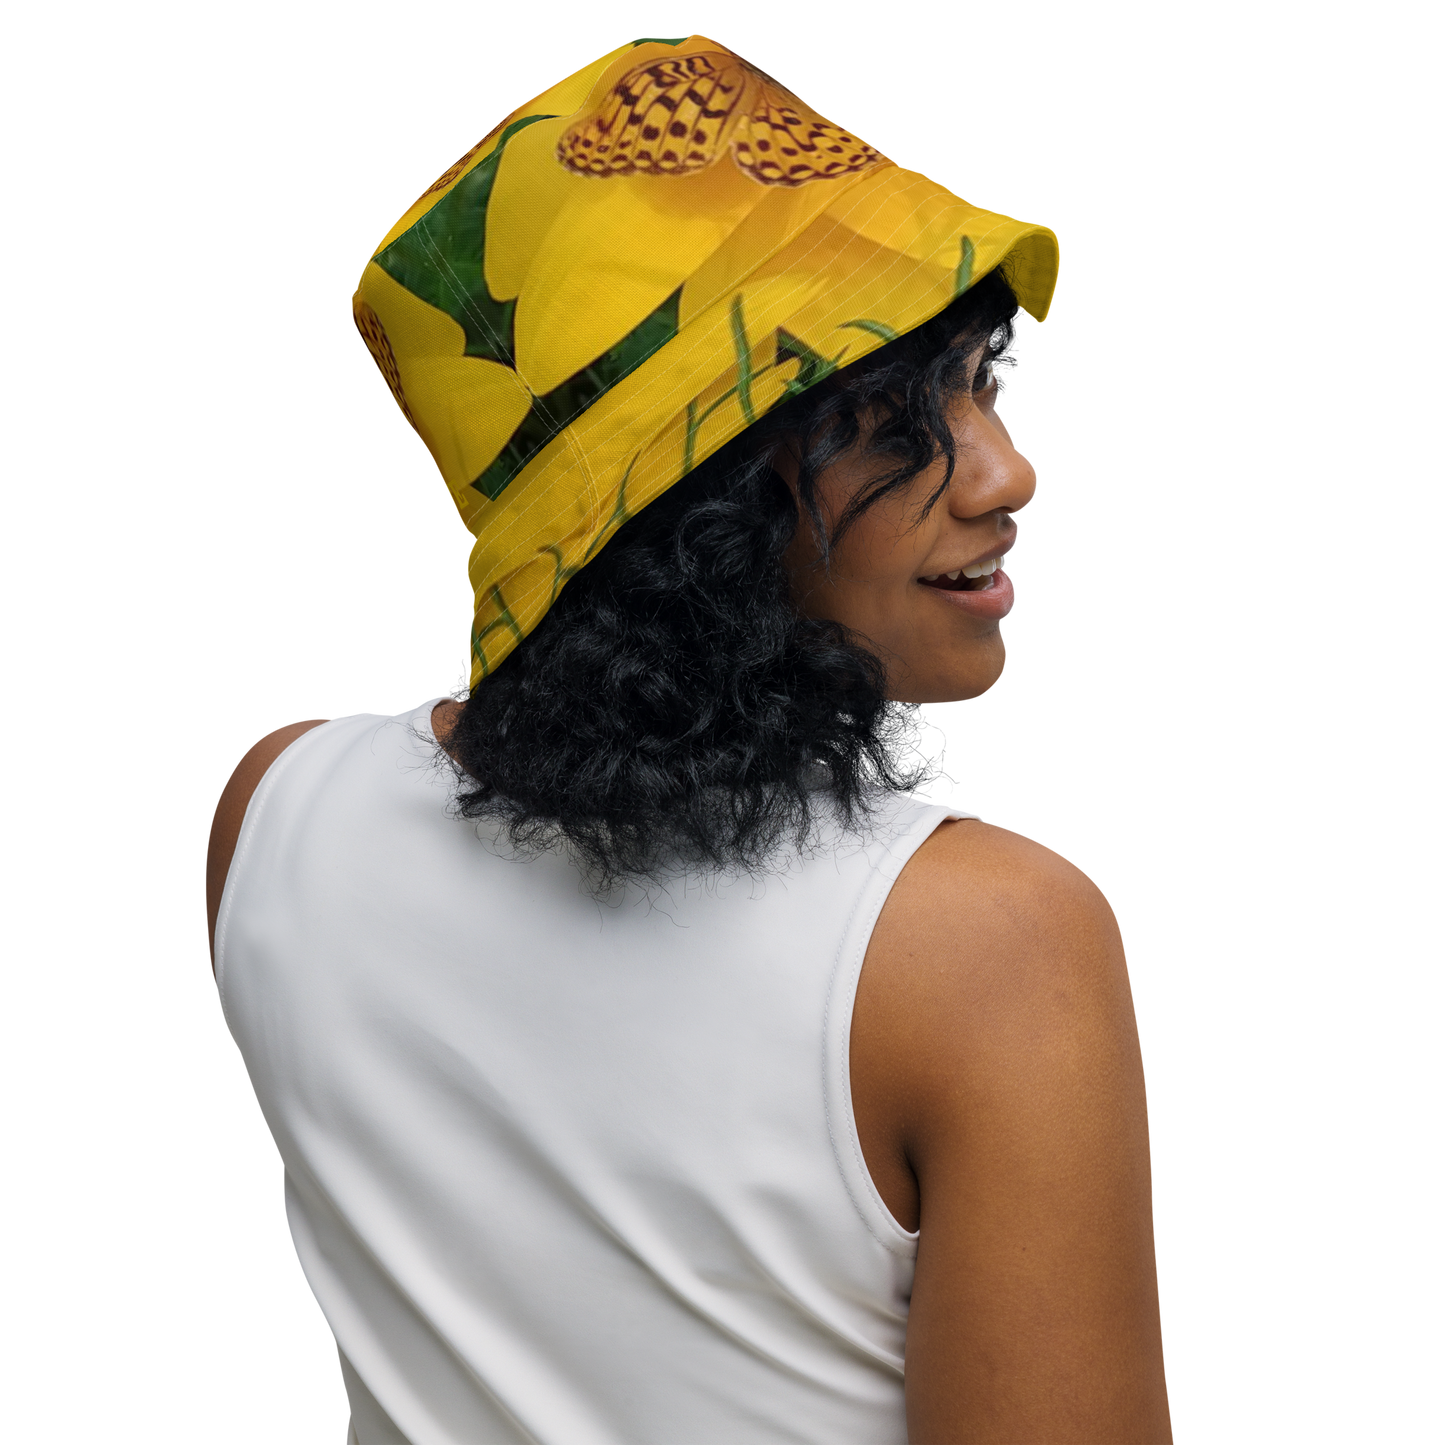 The FLOWER LOVE Collection - "Butterfly Beauty" Design Premium Reversible Bucket Hat - Yellow Inside - Beach Hat, Gifts for Her